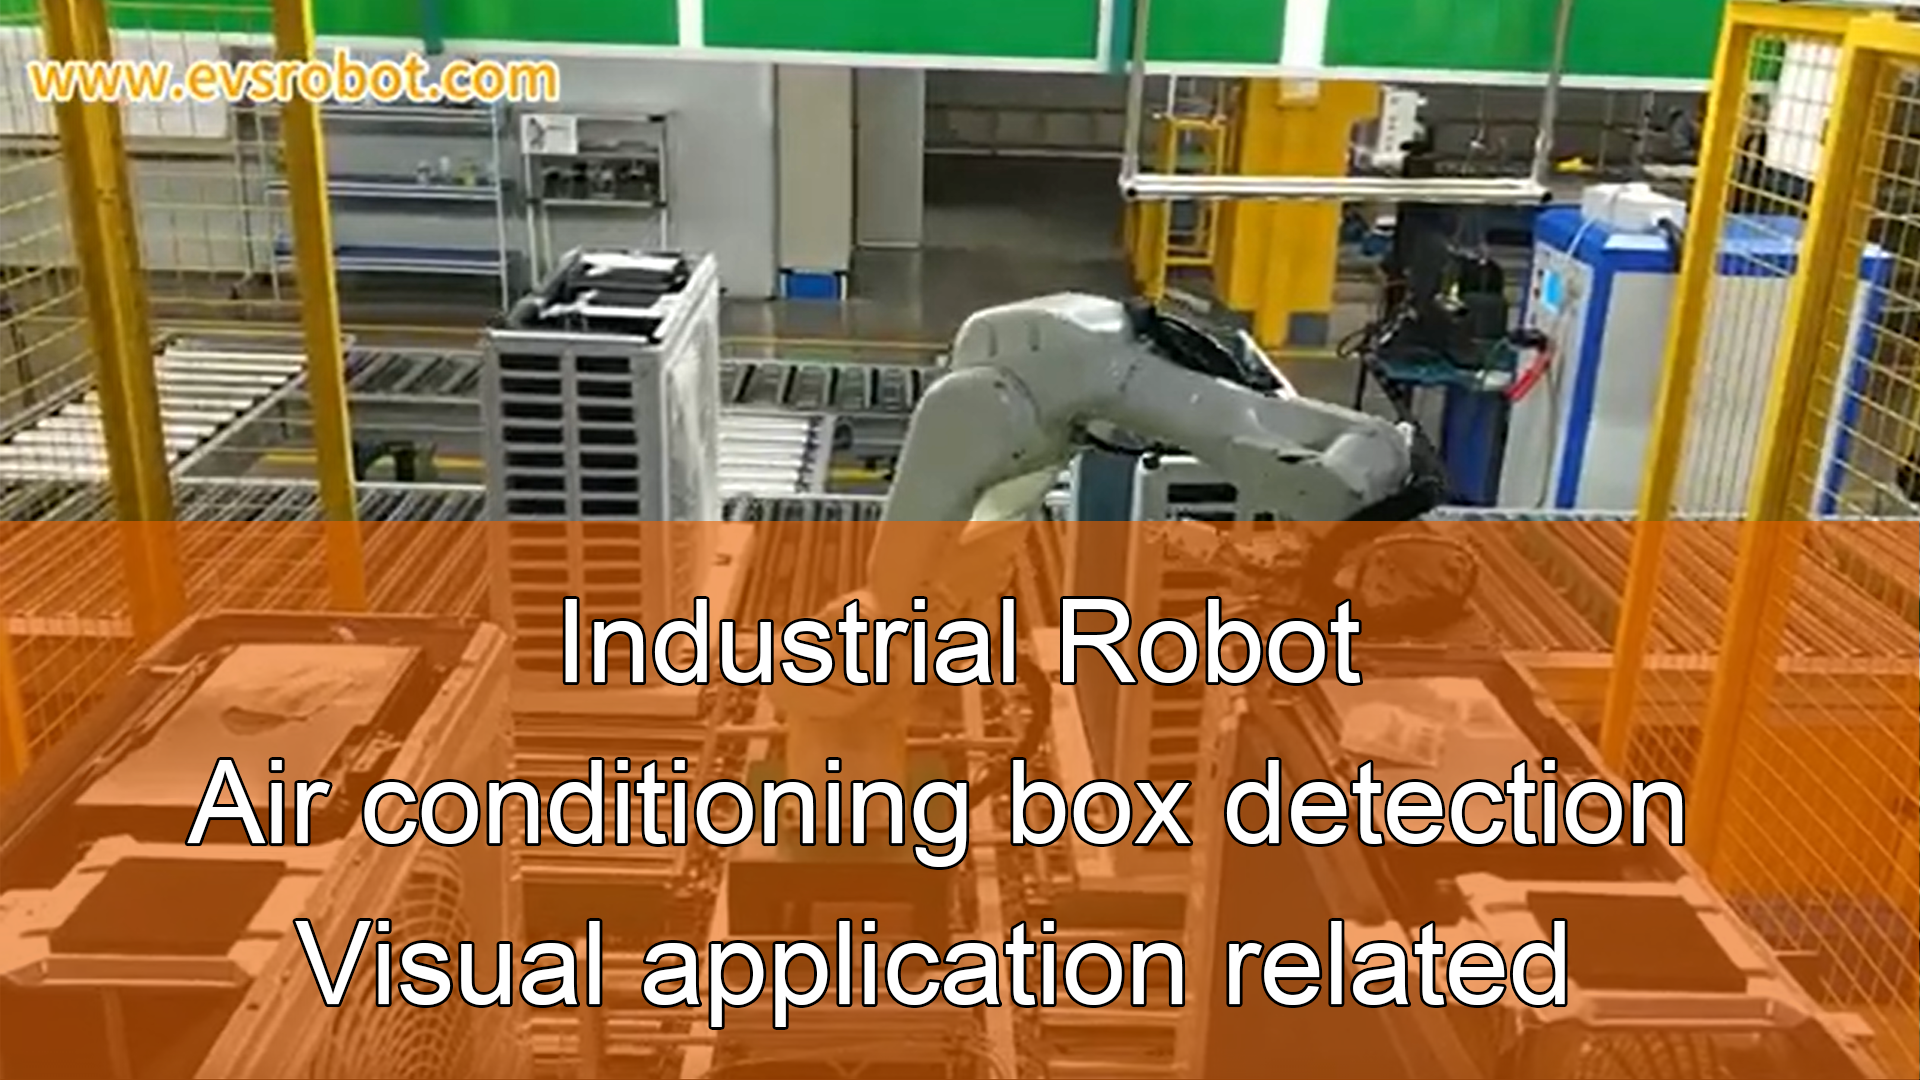 Industrial Robot | Air conditioning box detection| Visual application related